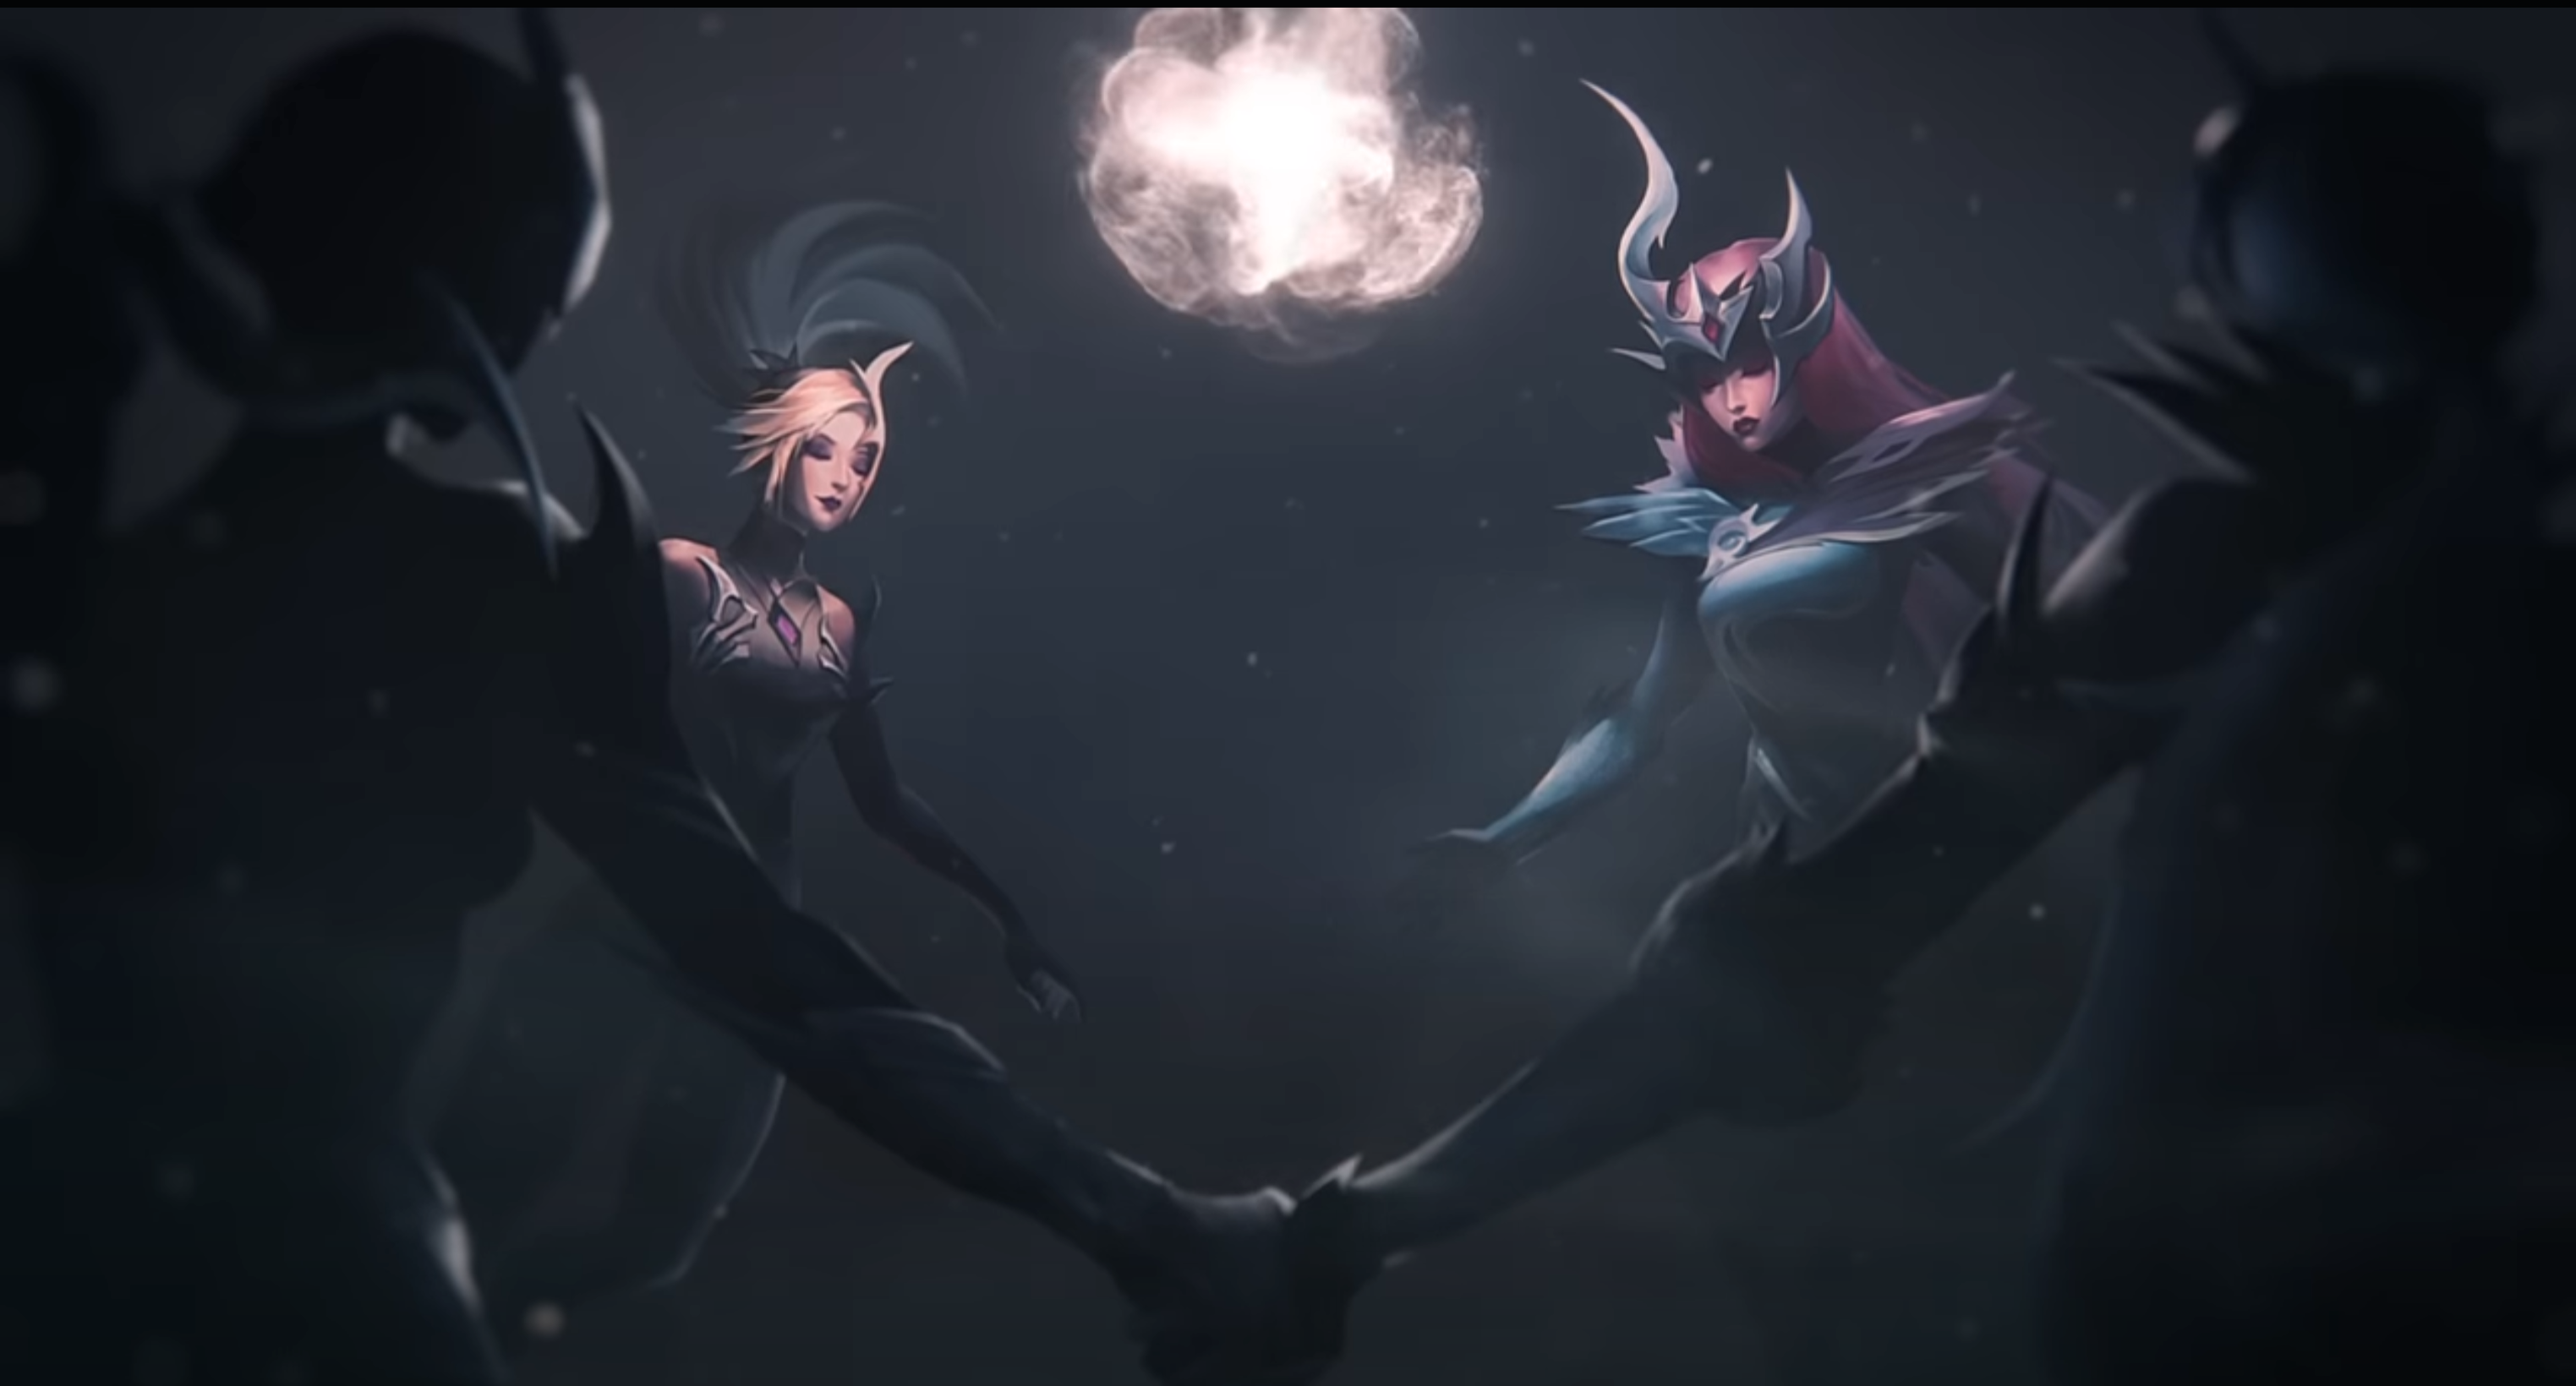 New batch of Coven skins coming to LoL next month, Riot confirms Dot